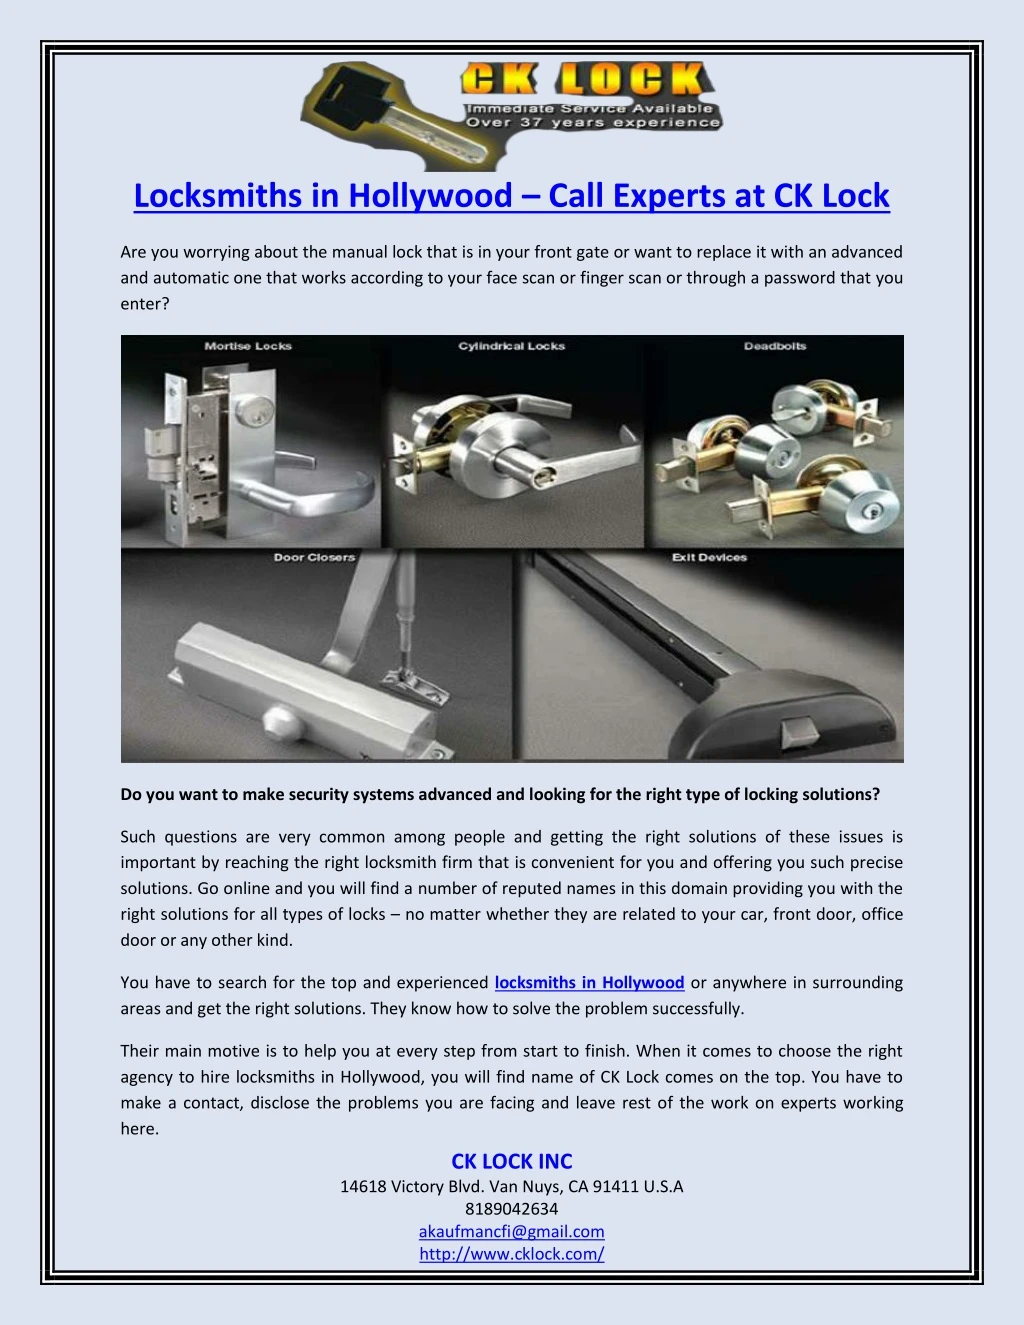 locksmiths in hollywood call experts at ck lock